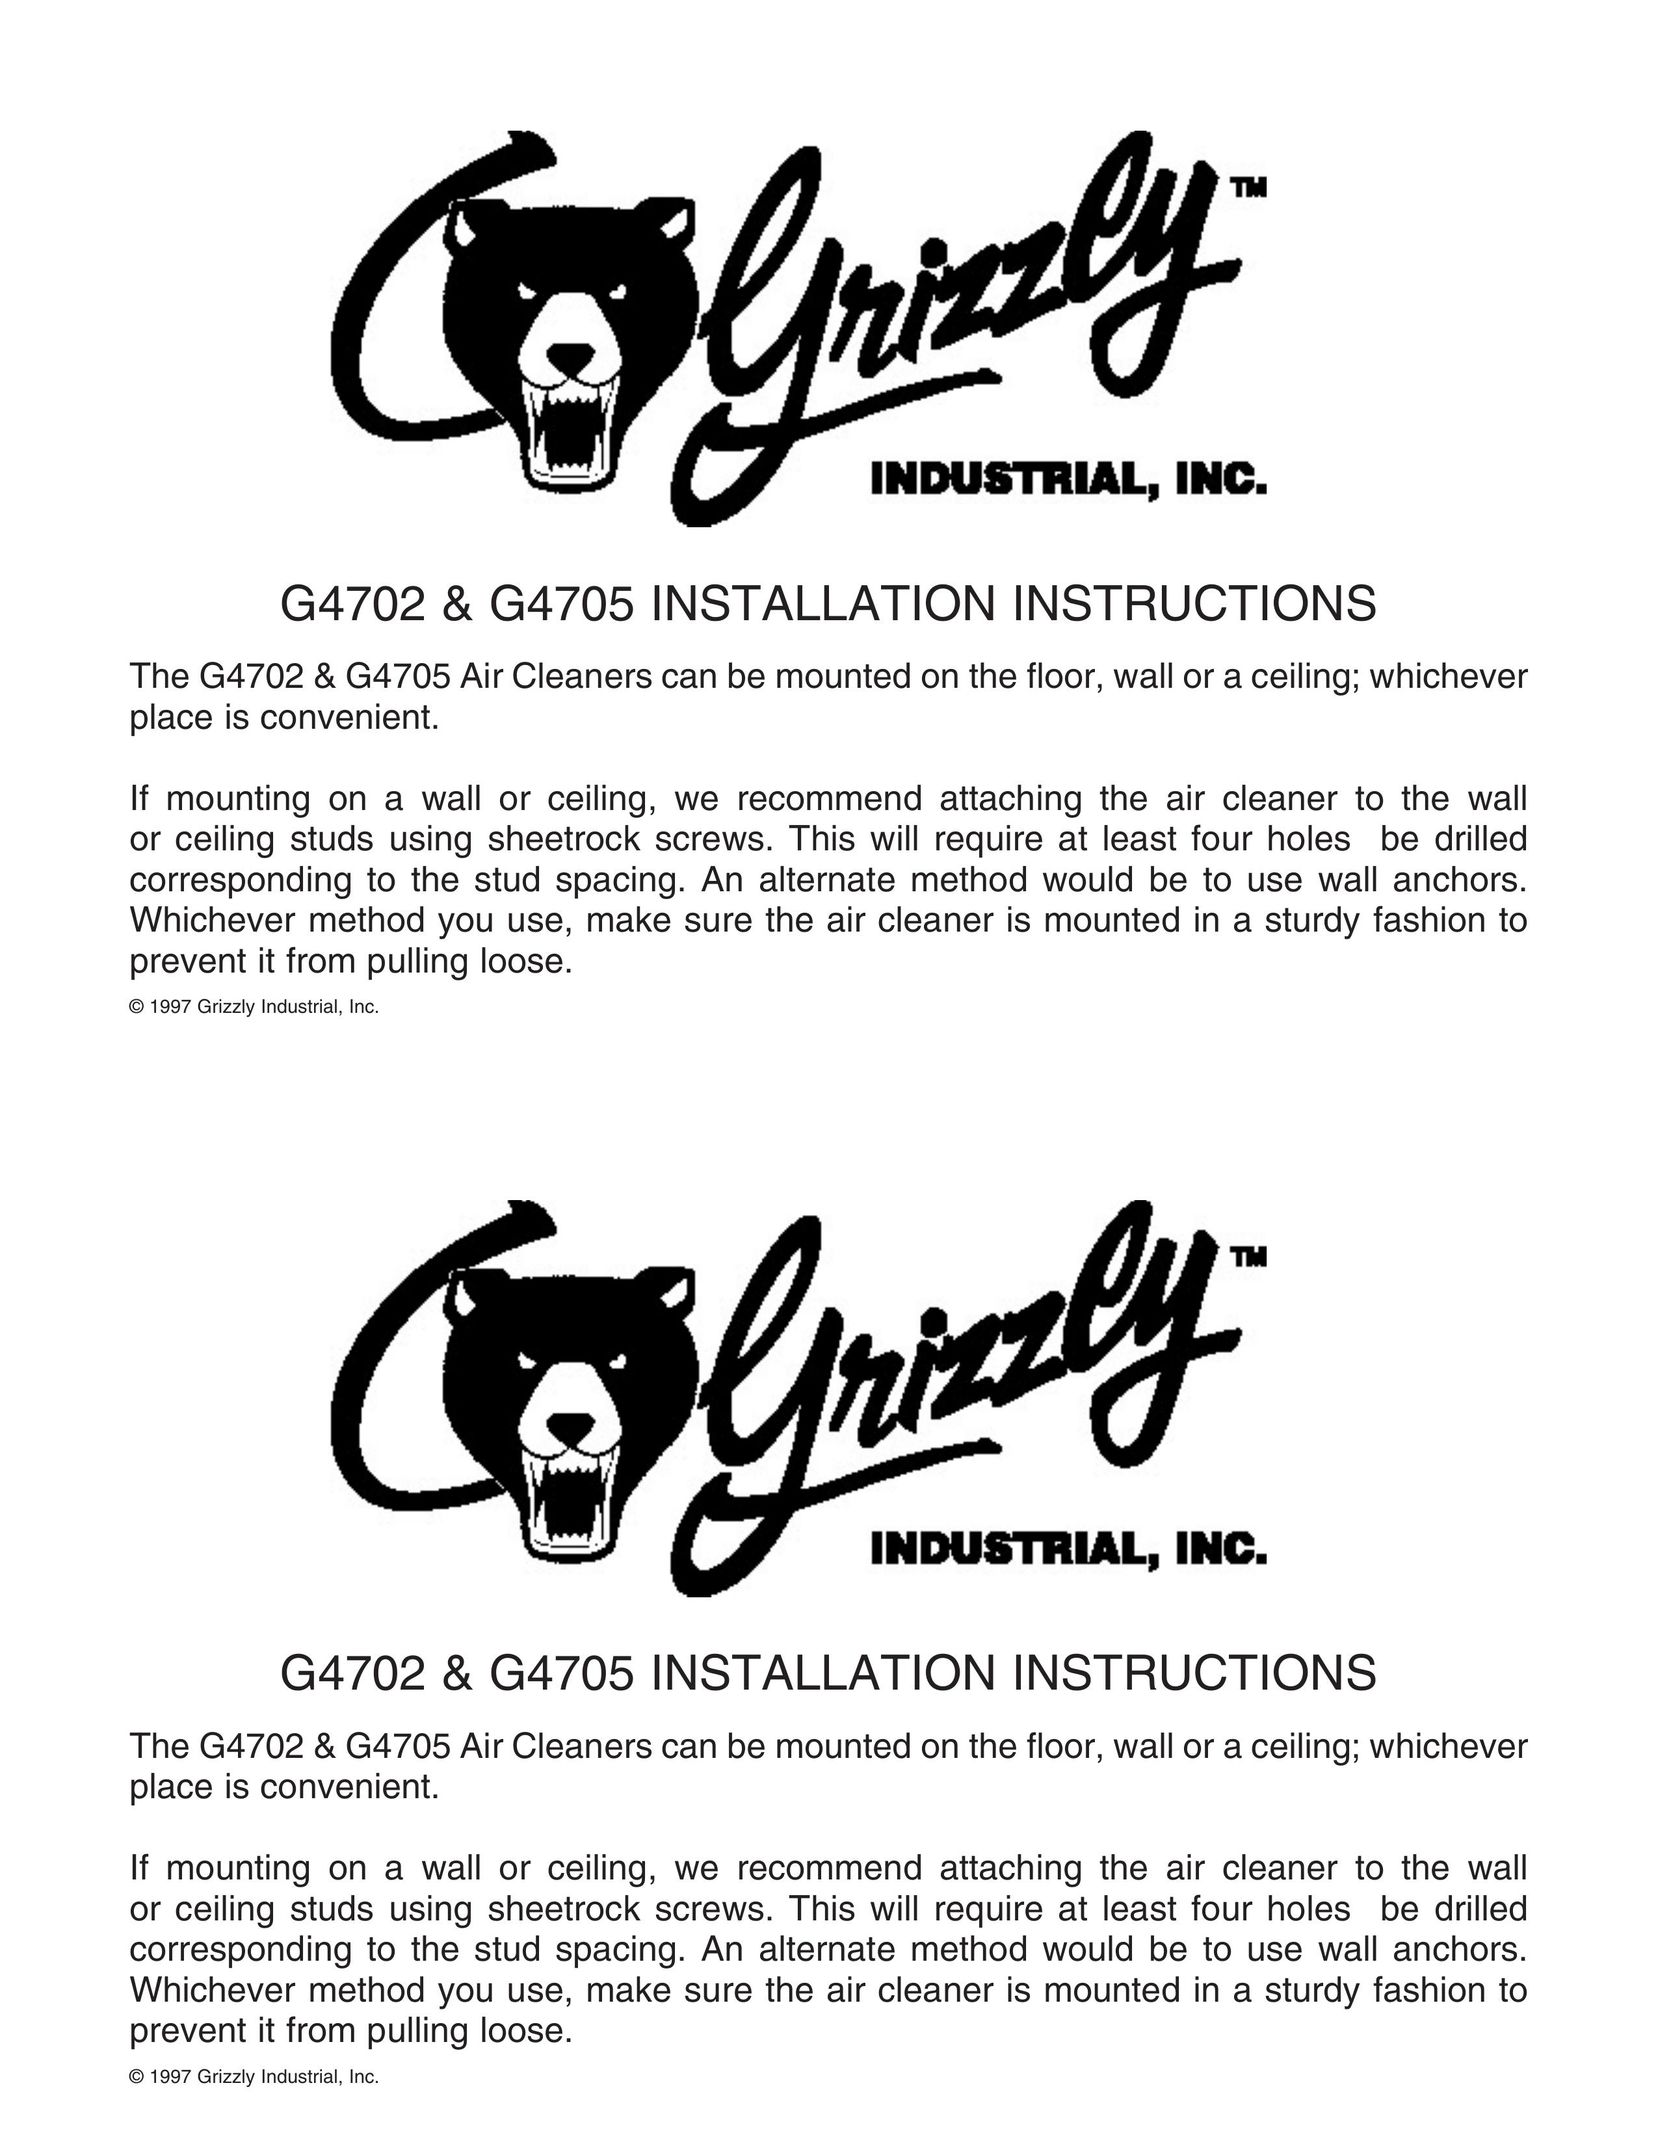 Grizzly G4702 Air Cleaner User Manual